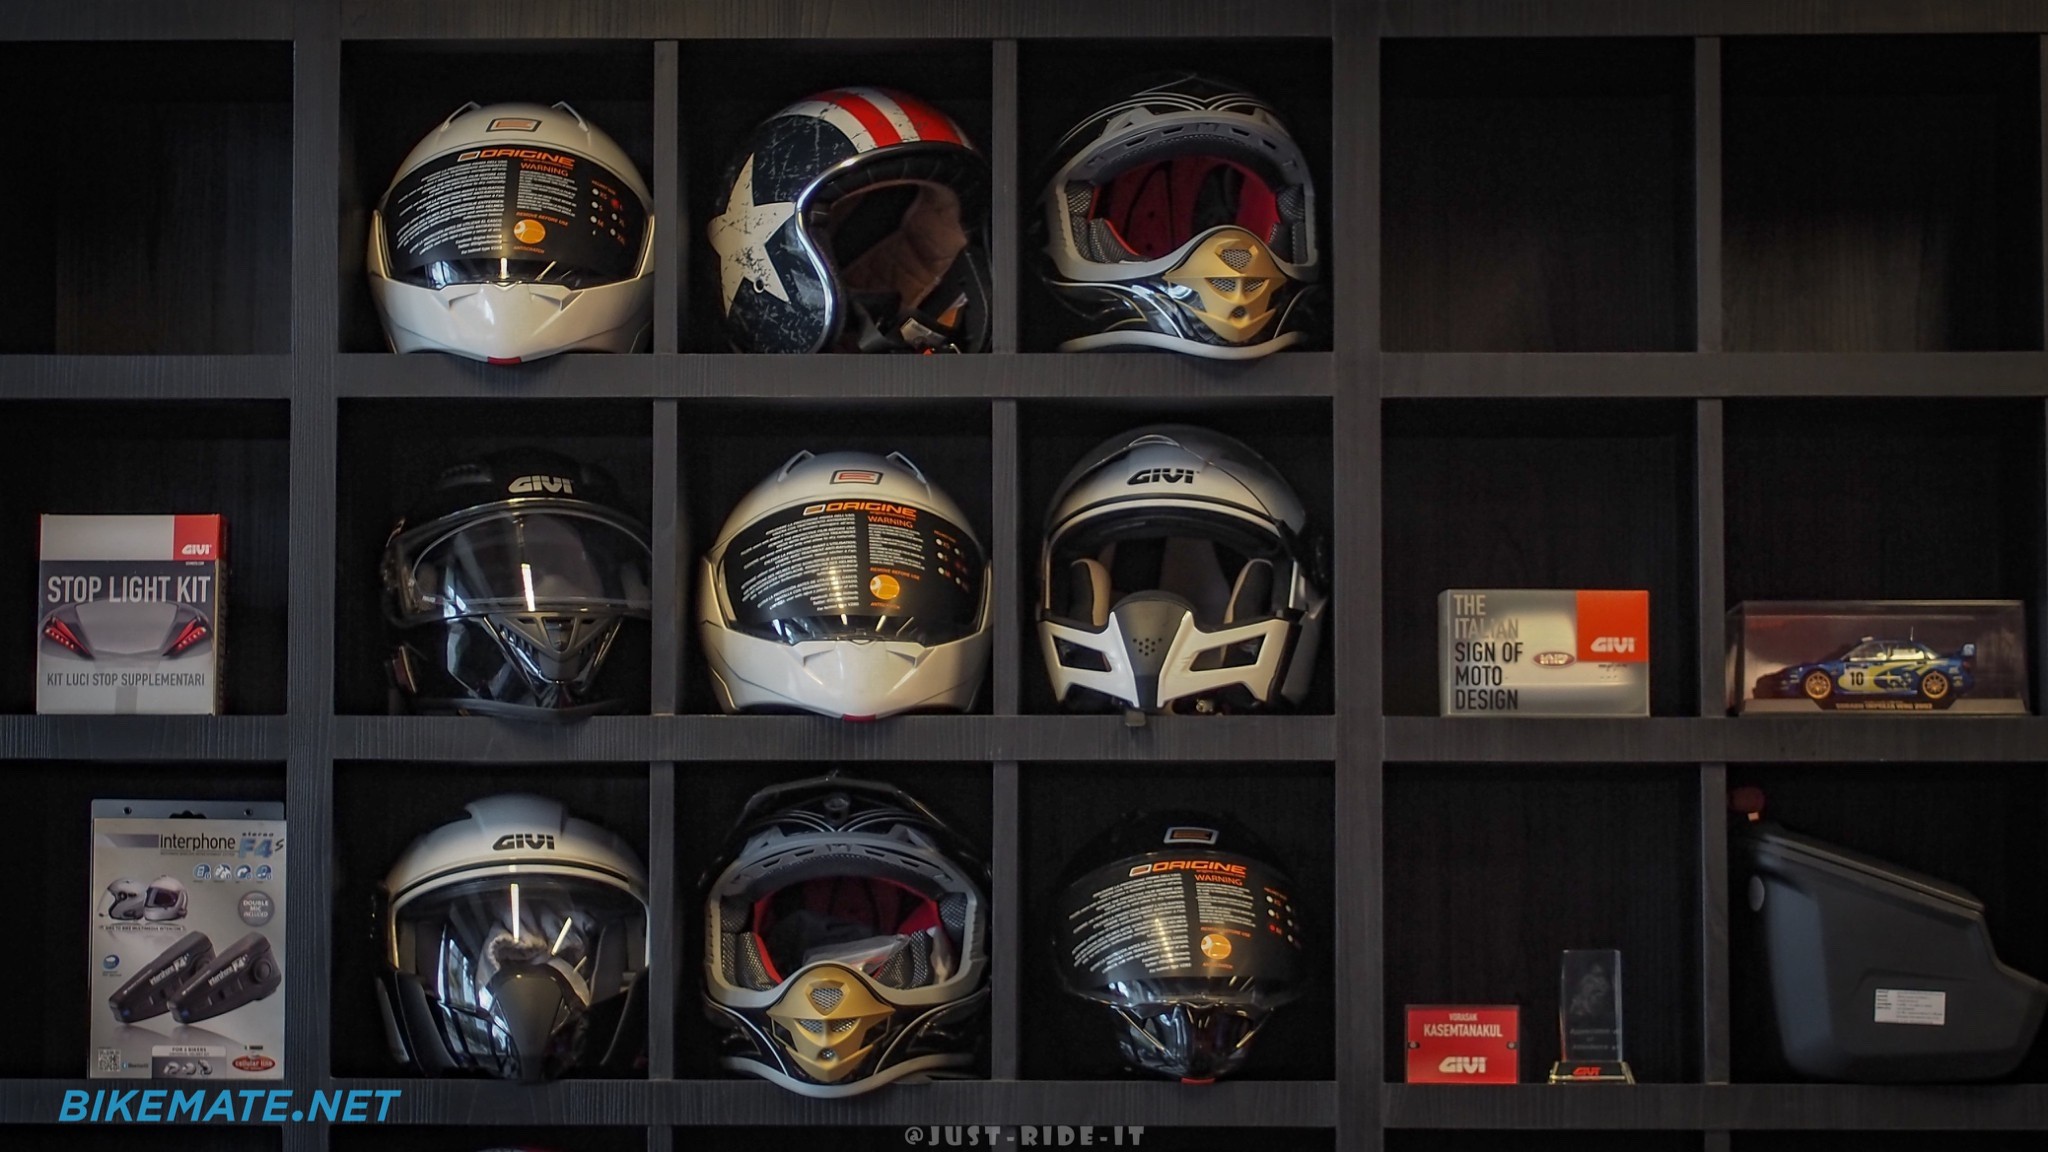 Wall storage space with motorcycle helmets